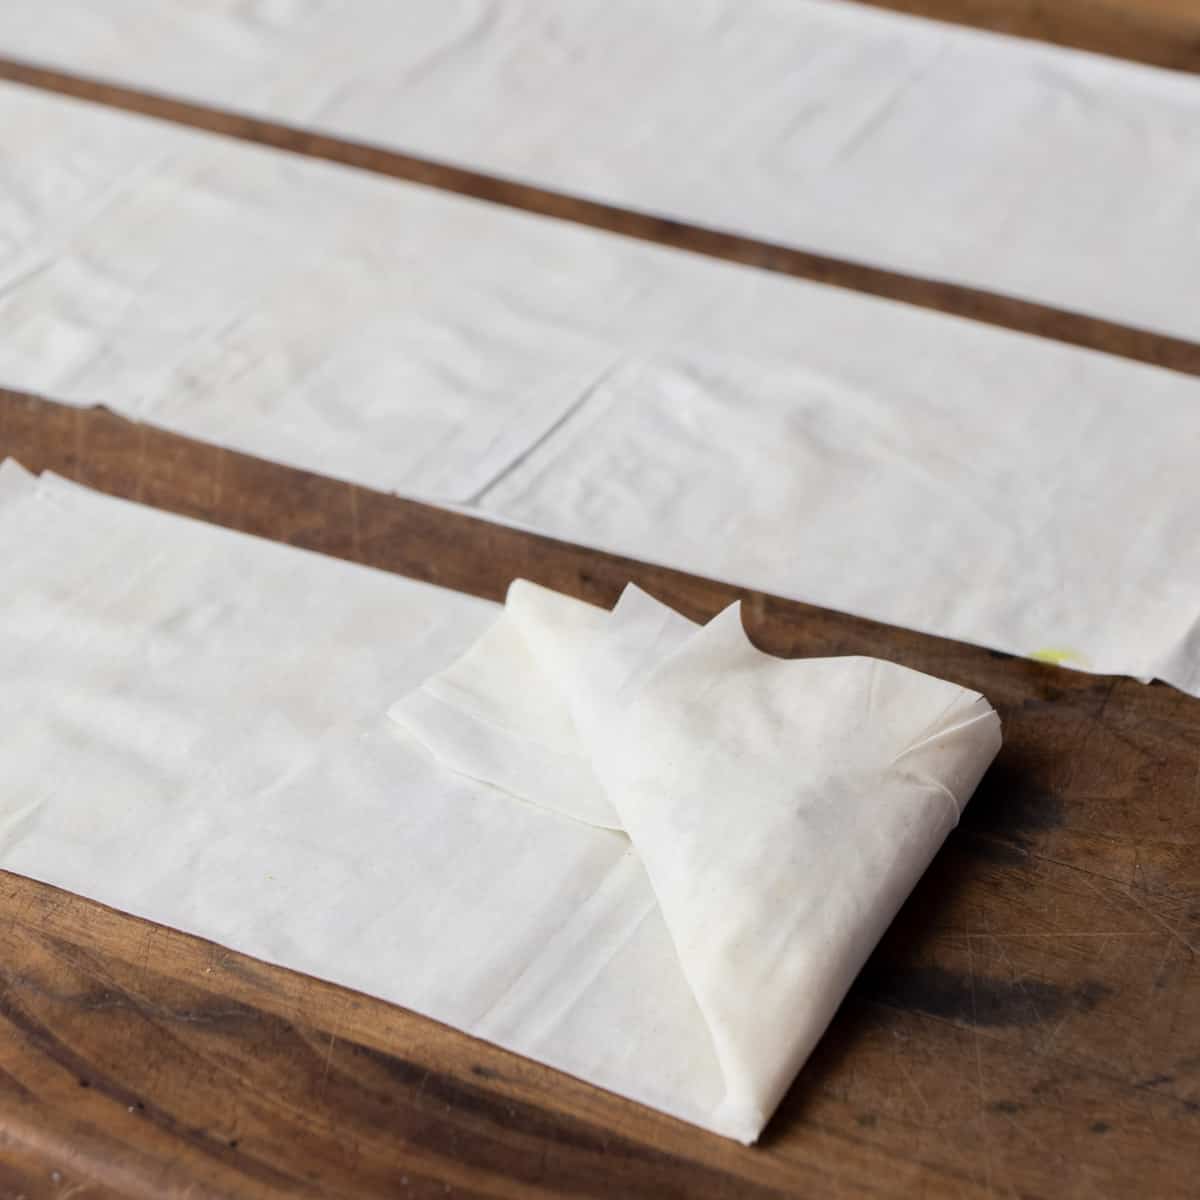 Folding phyllo paper into a stuffed triangle.